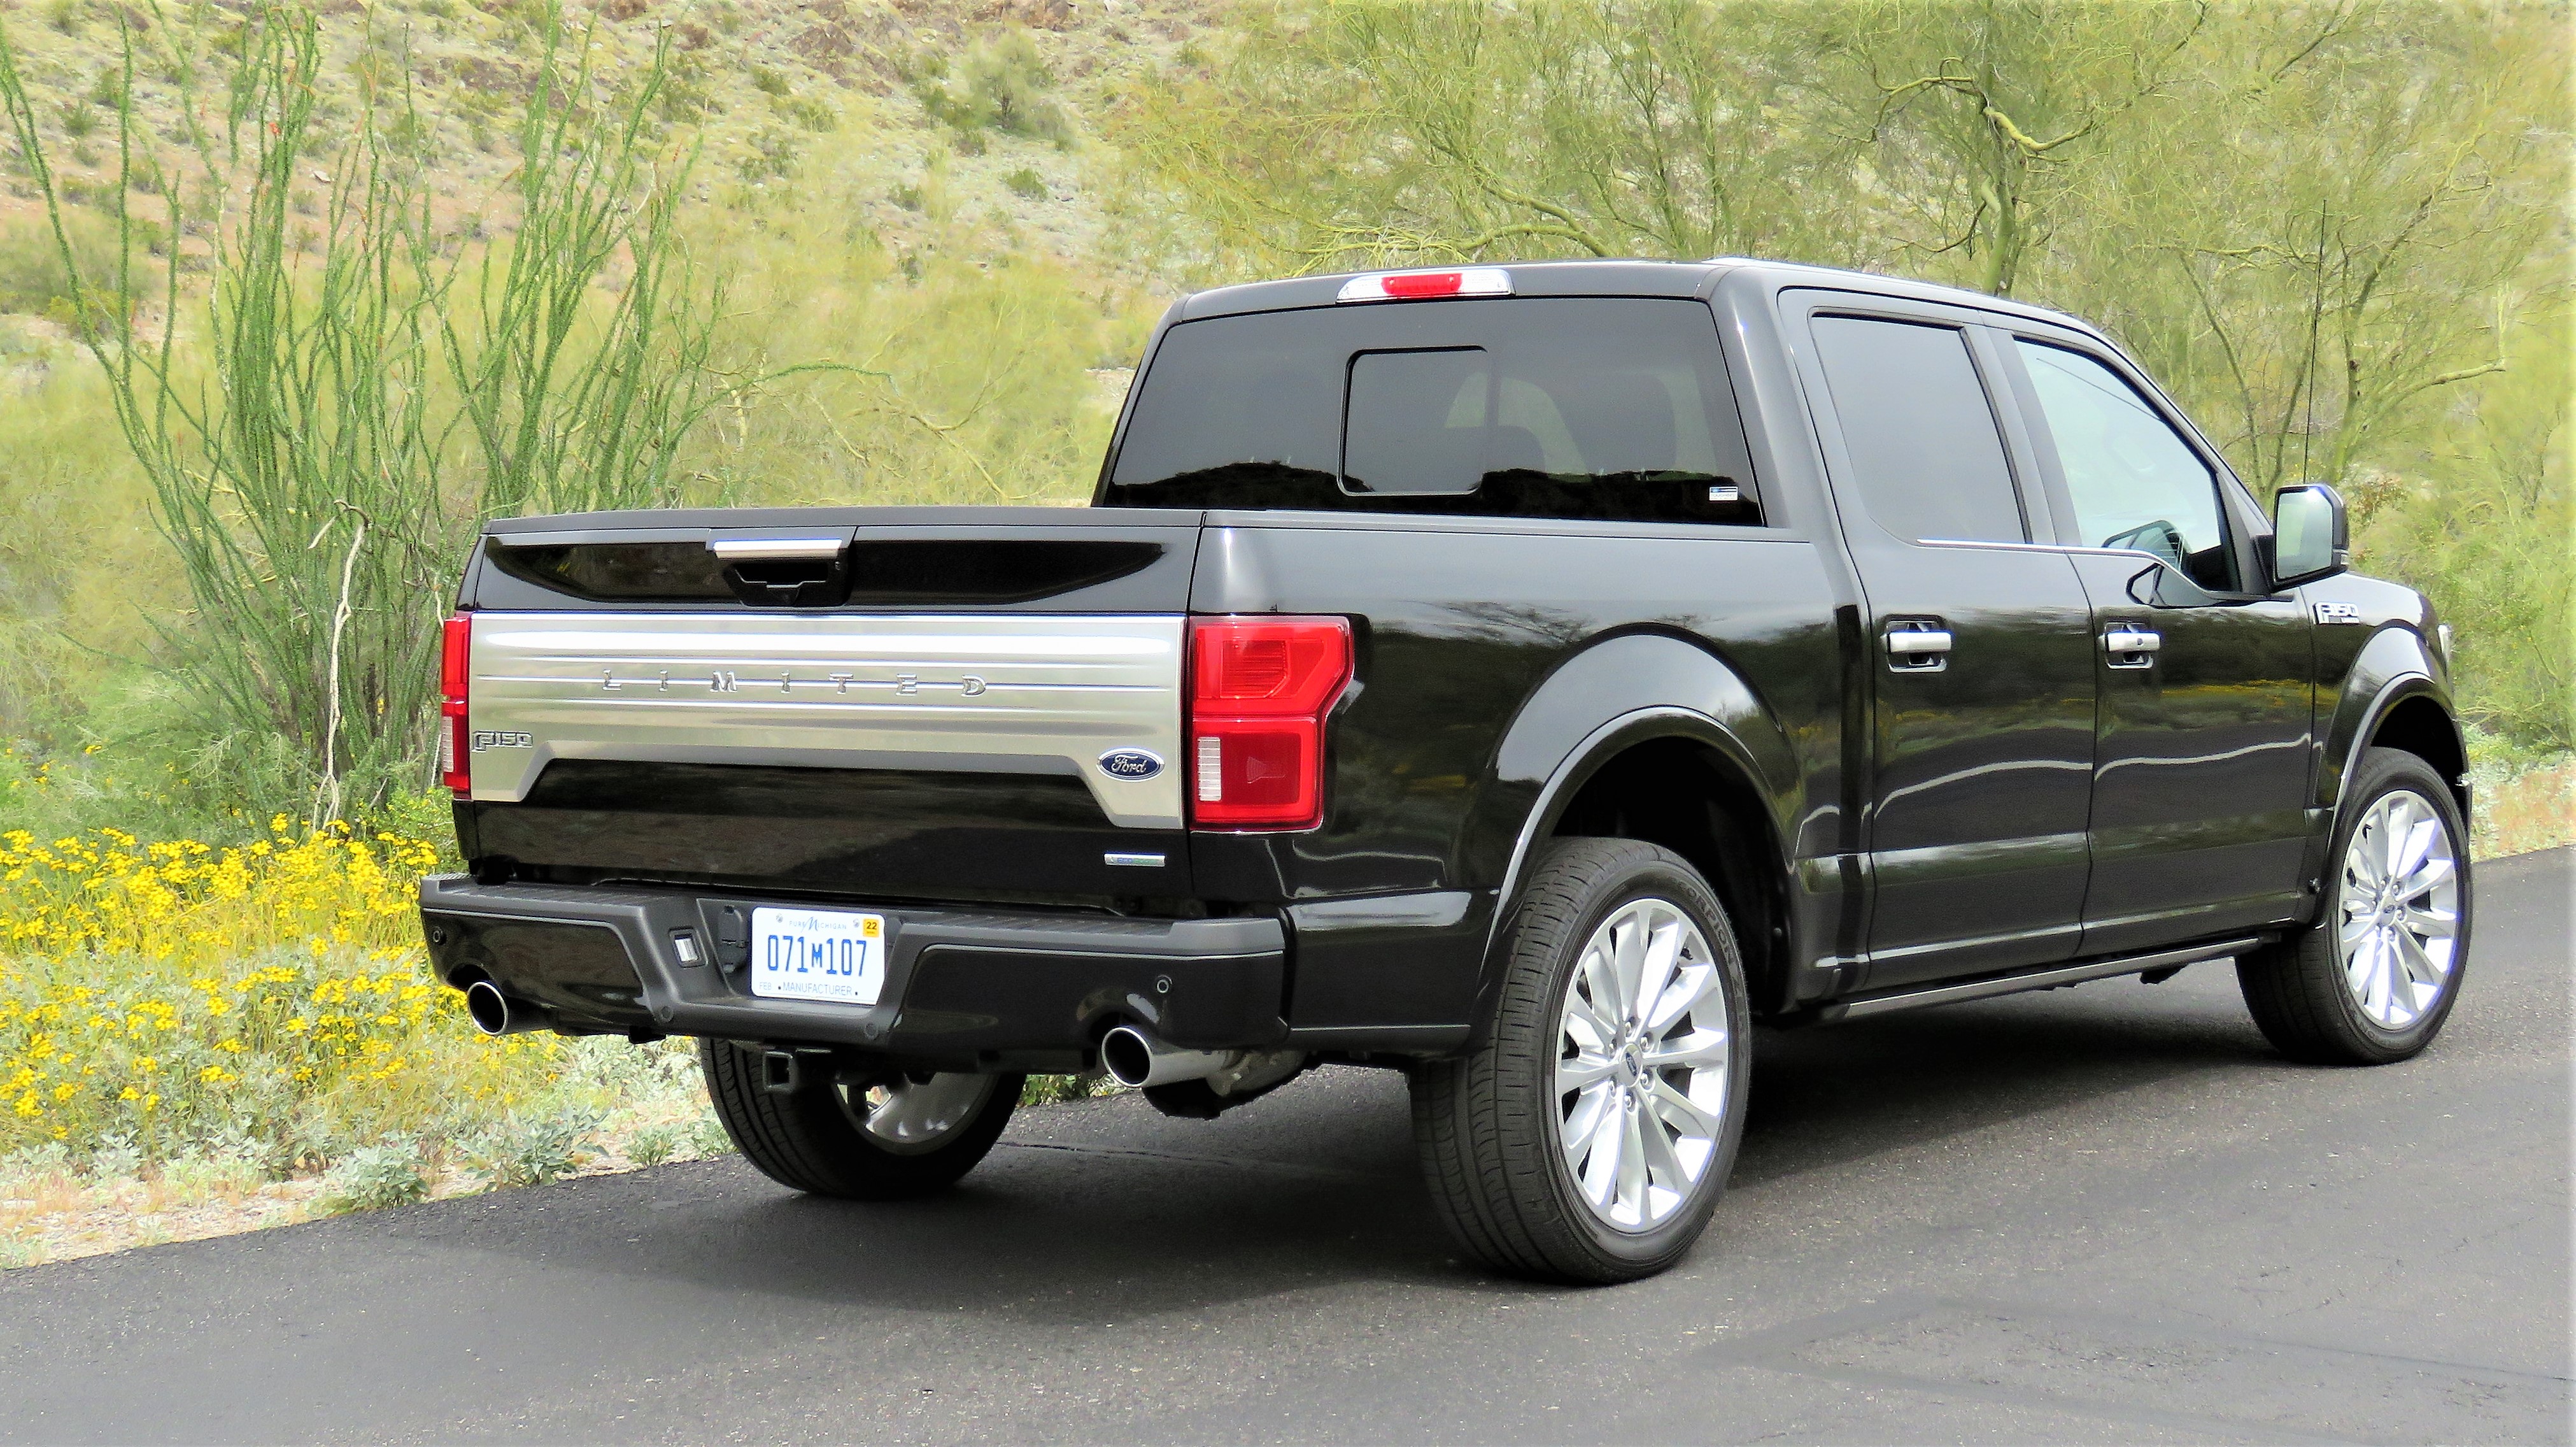 Lap of luxury in Ford F-150 Limited with Ecoboost V6 power